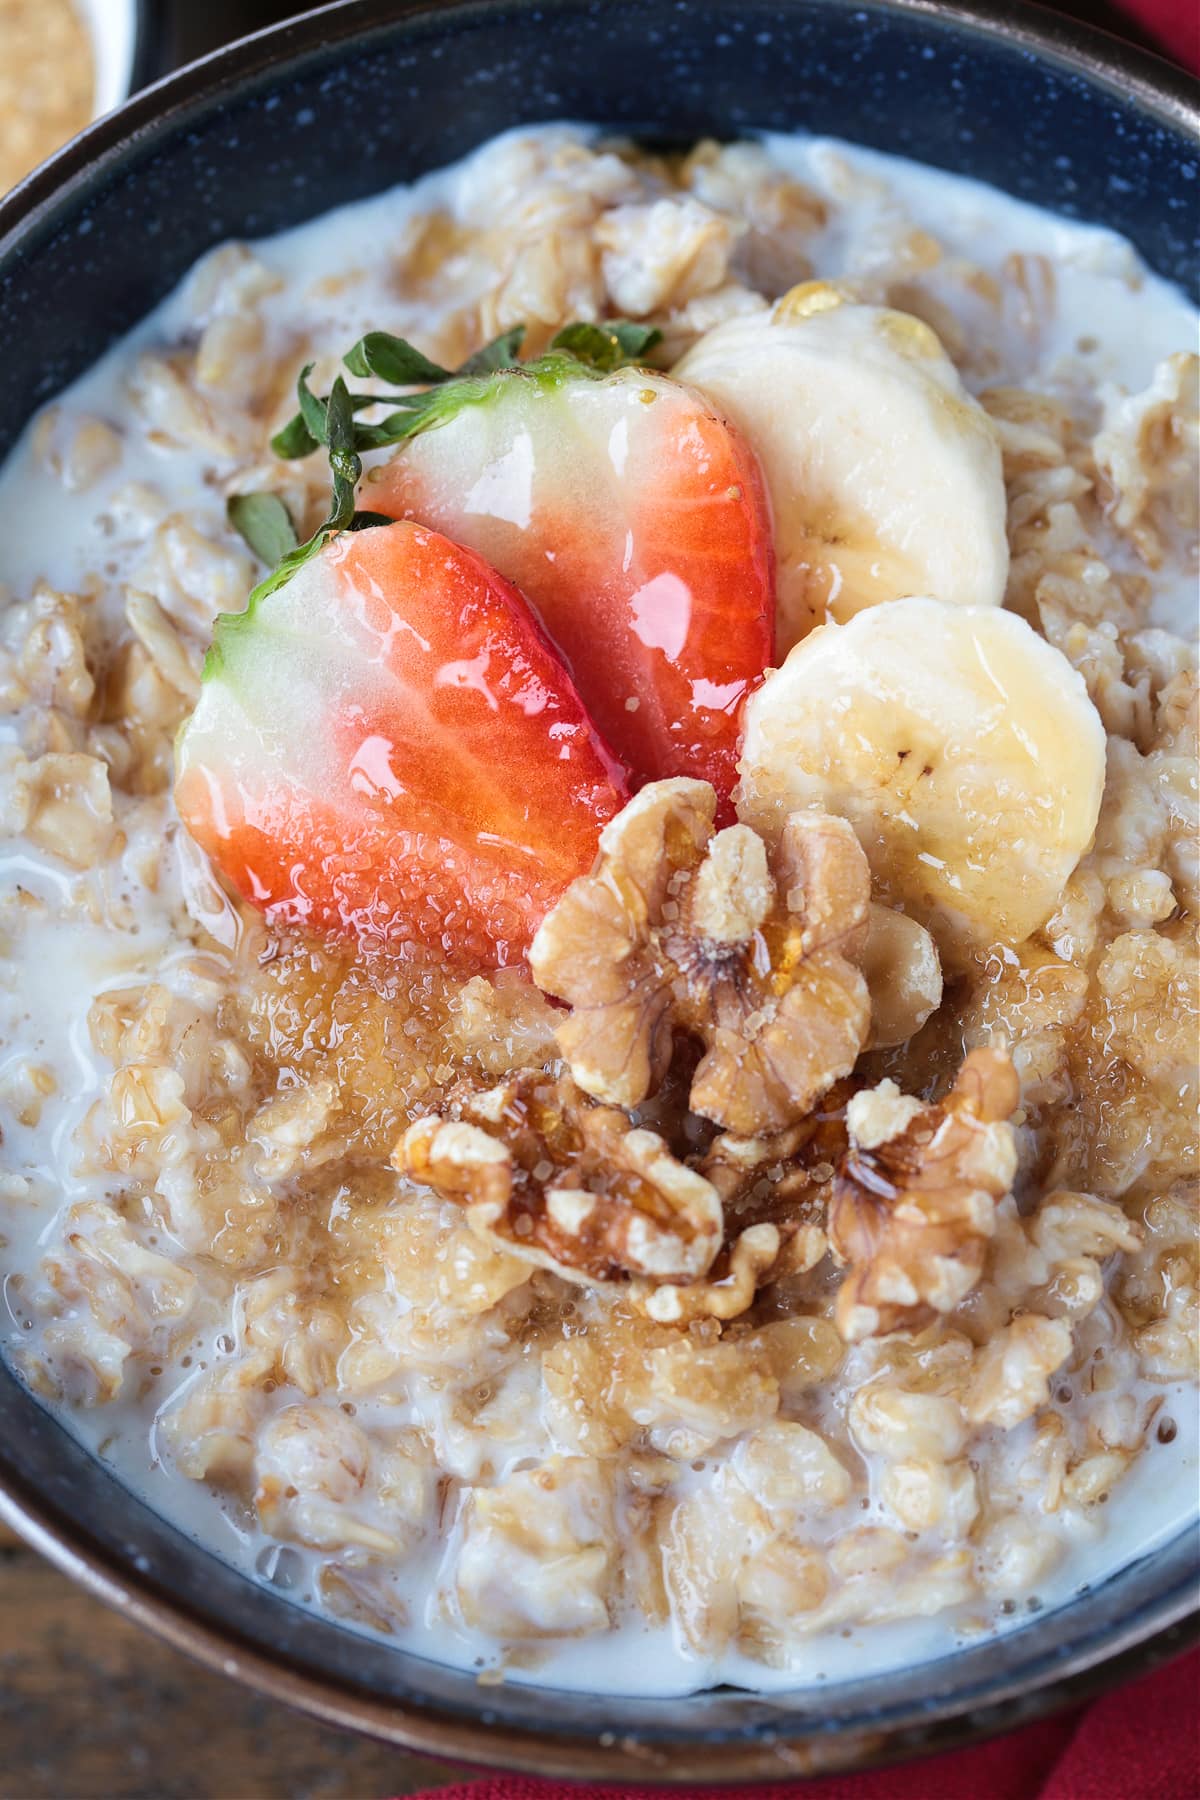 oatmeal in a bowl with strawberries, bananas and walnuts